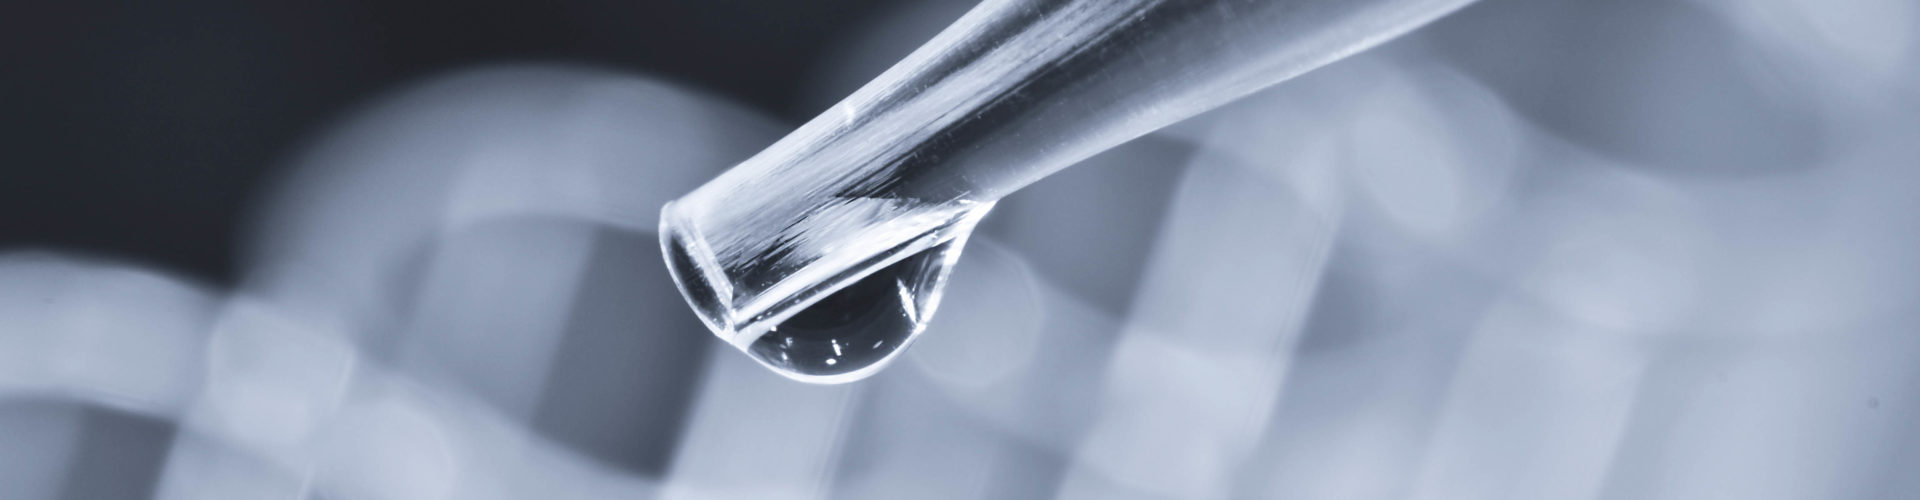 water droplet on a pipette